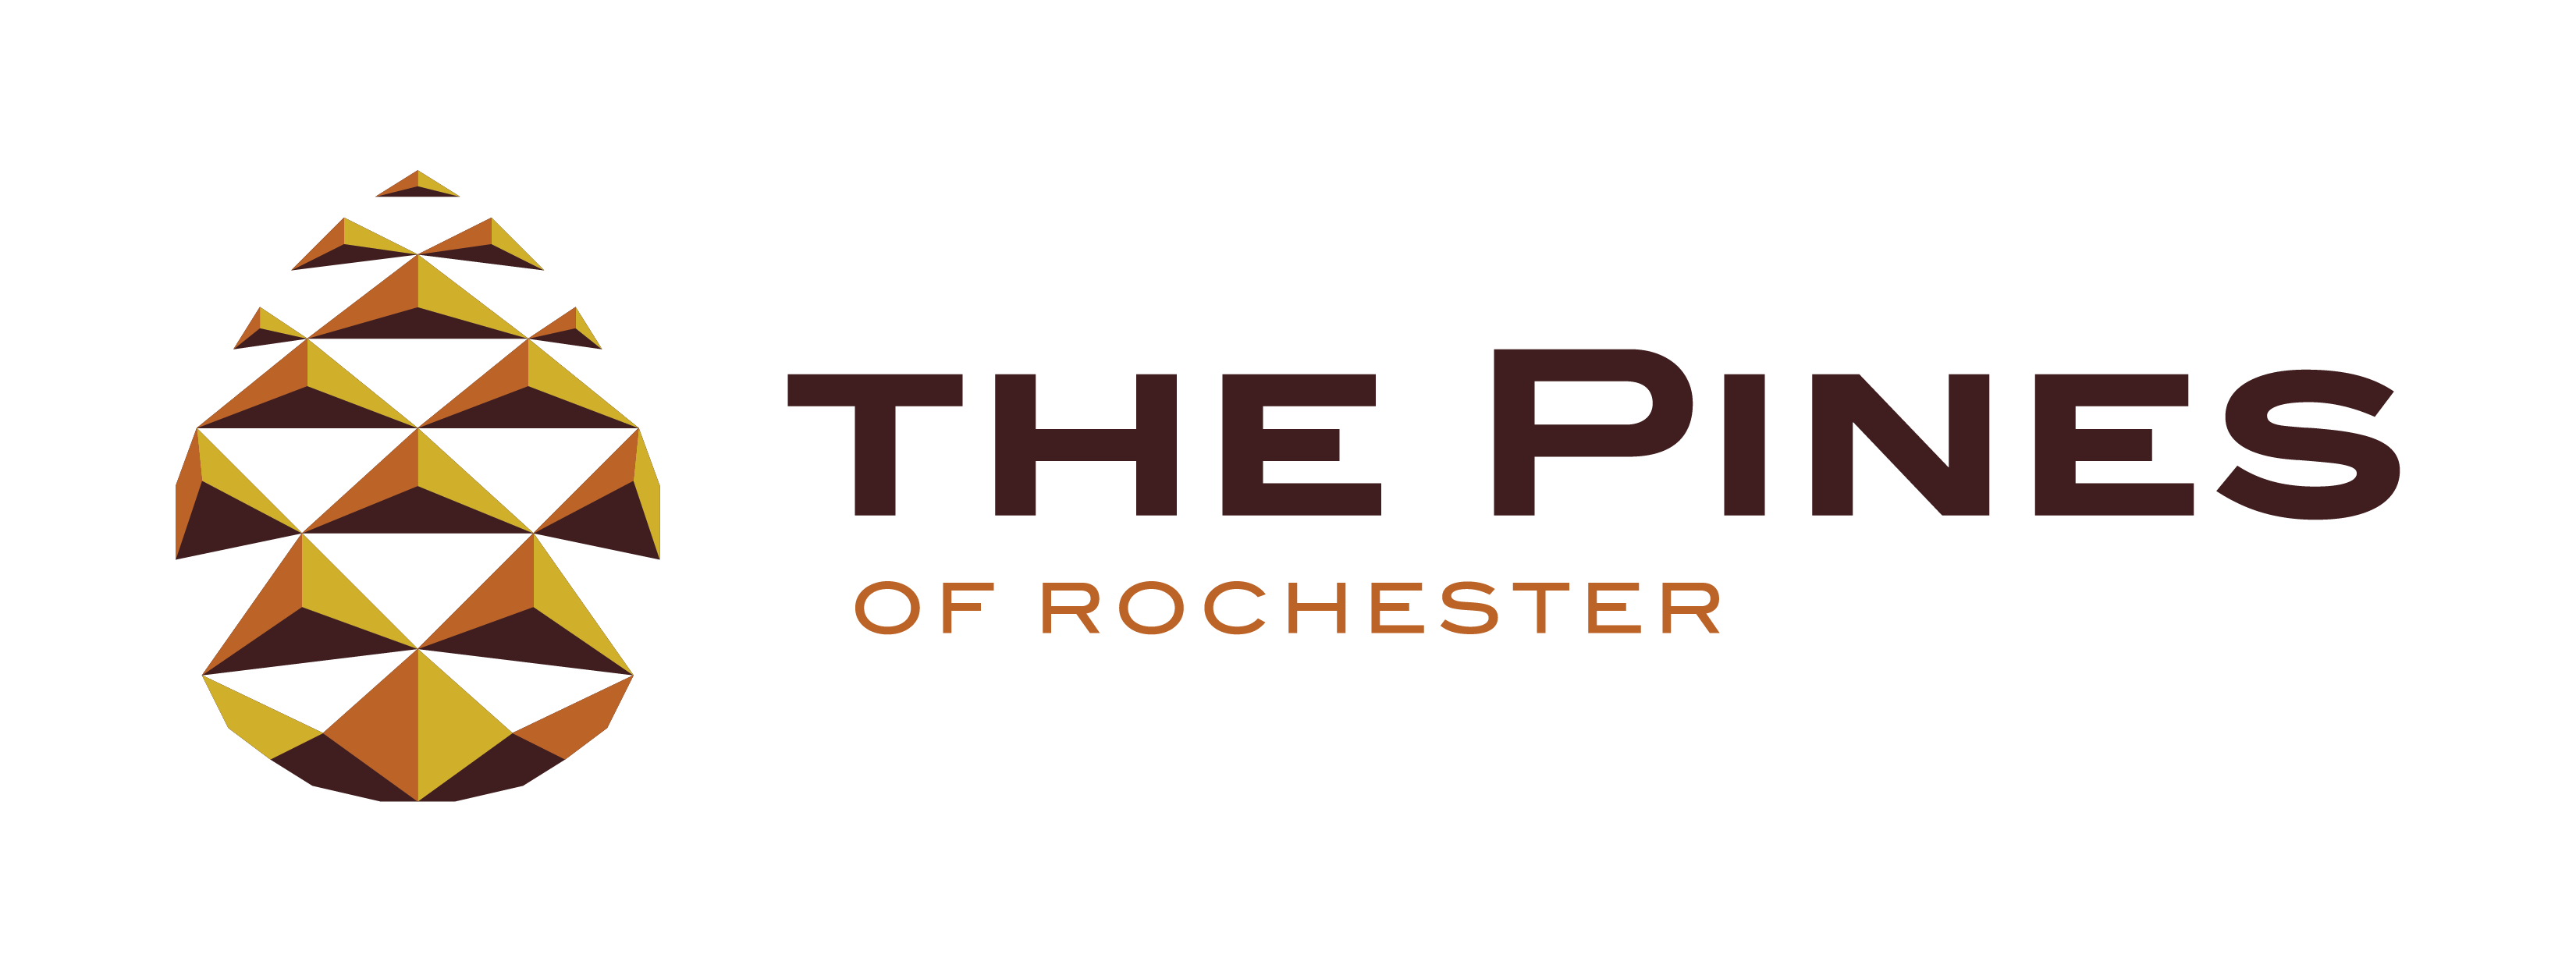 The Pines Logo